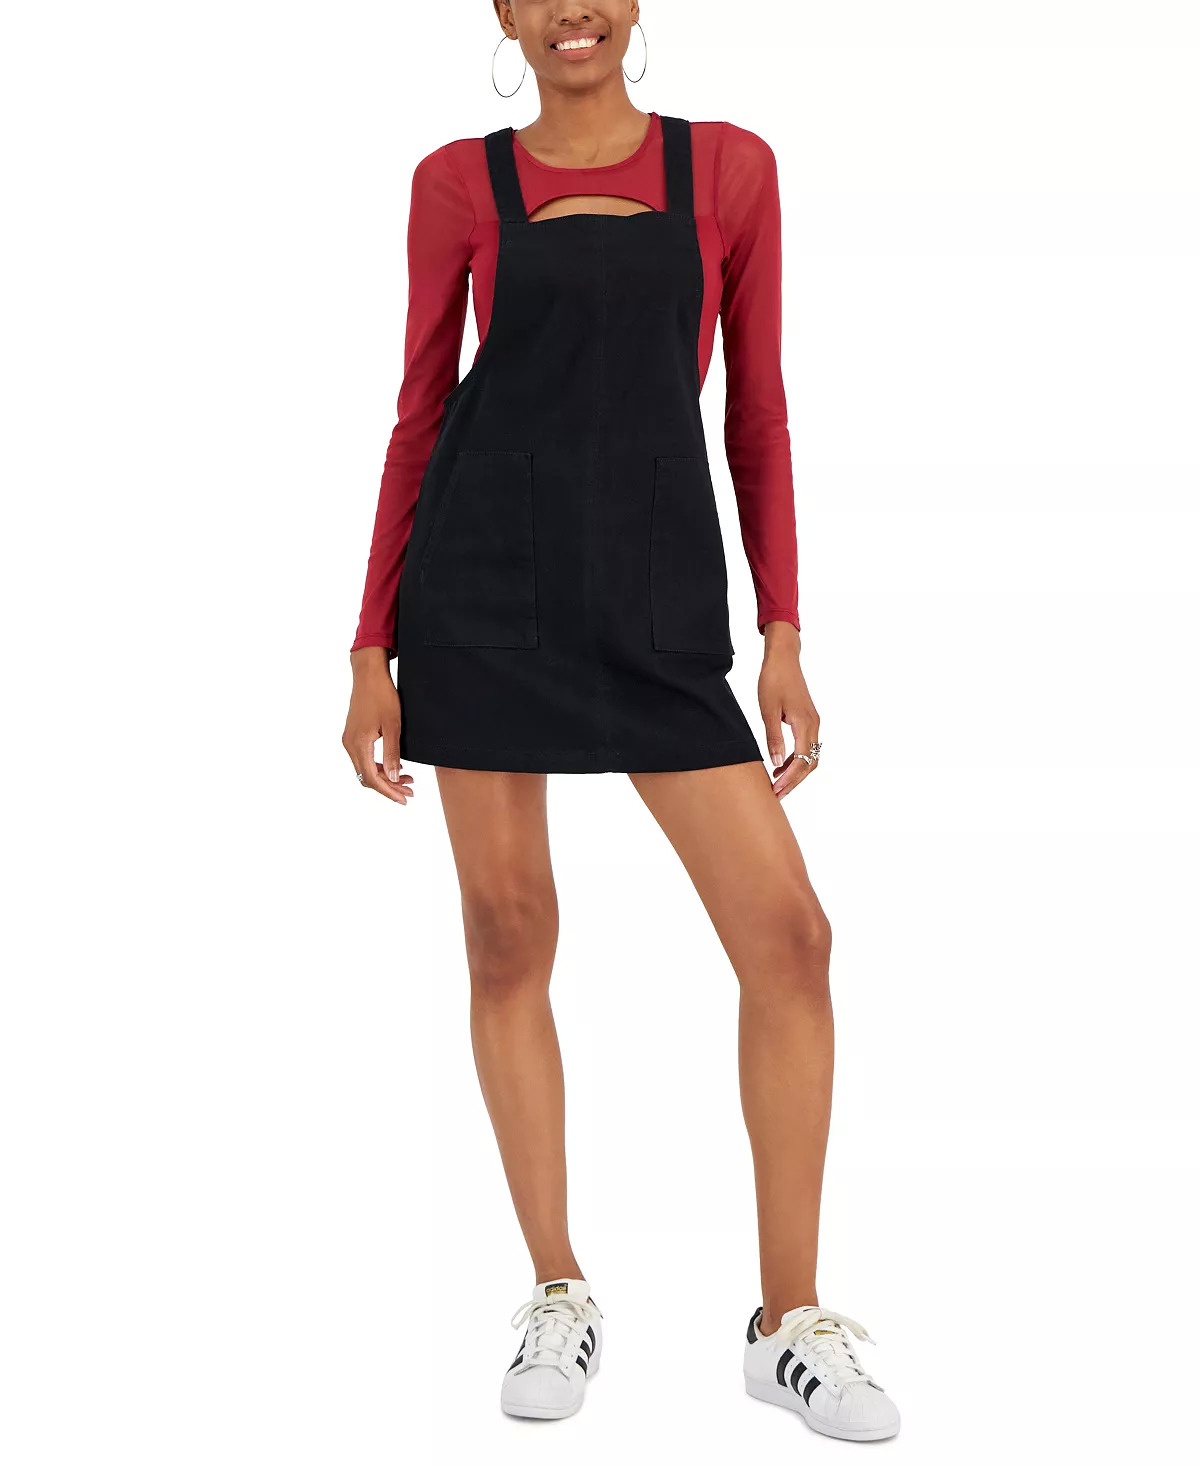 Juniors' Tinseltown Denim Pullover Pinafore $11.24, Women's And Now This Velour Dress $8.86 & More + Free Store P/U at Macy's or F/S on $25+